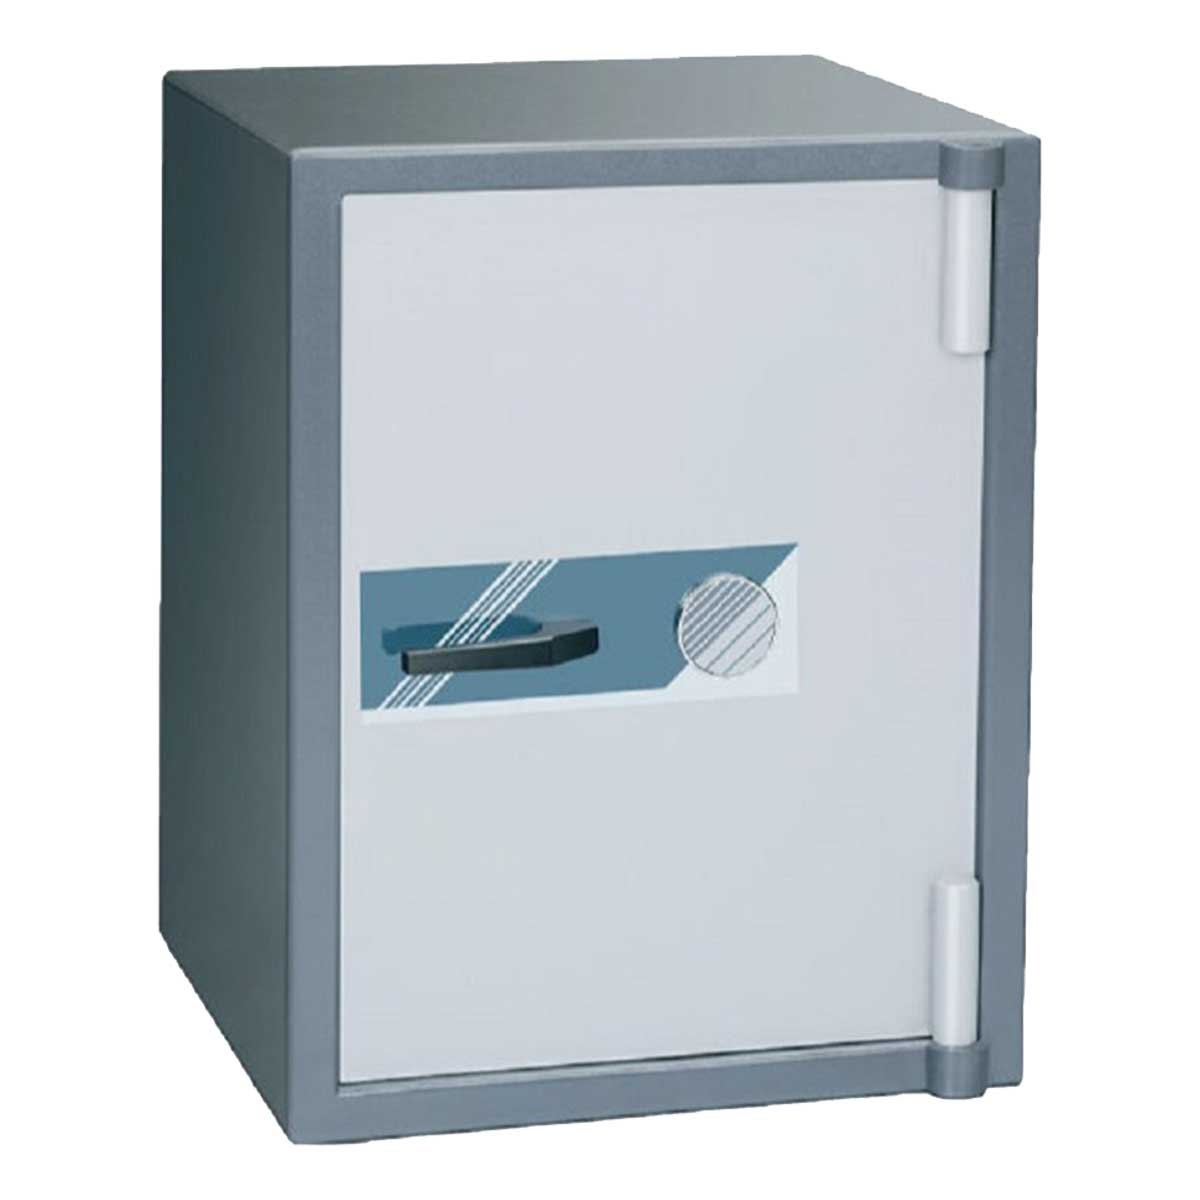 Burglary Safes Manufacturers, Suppliers in Green Park